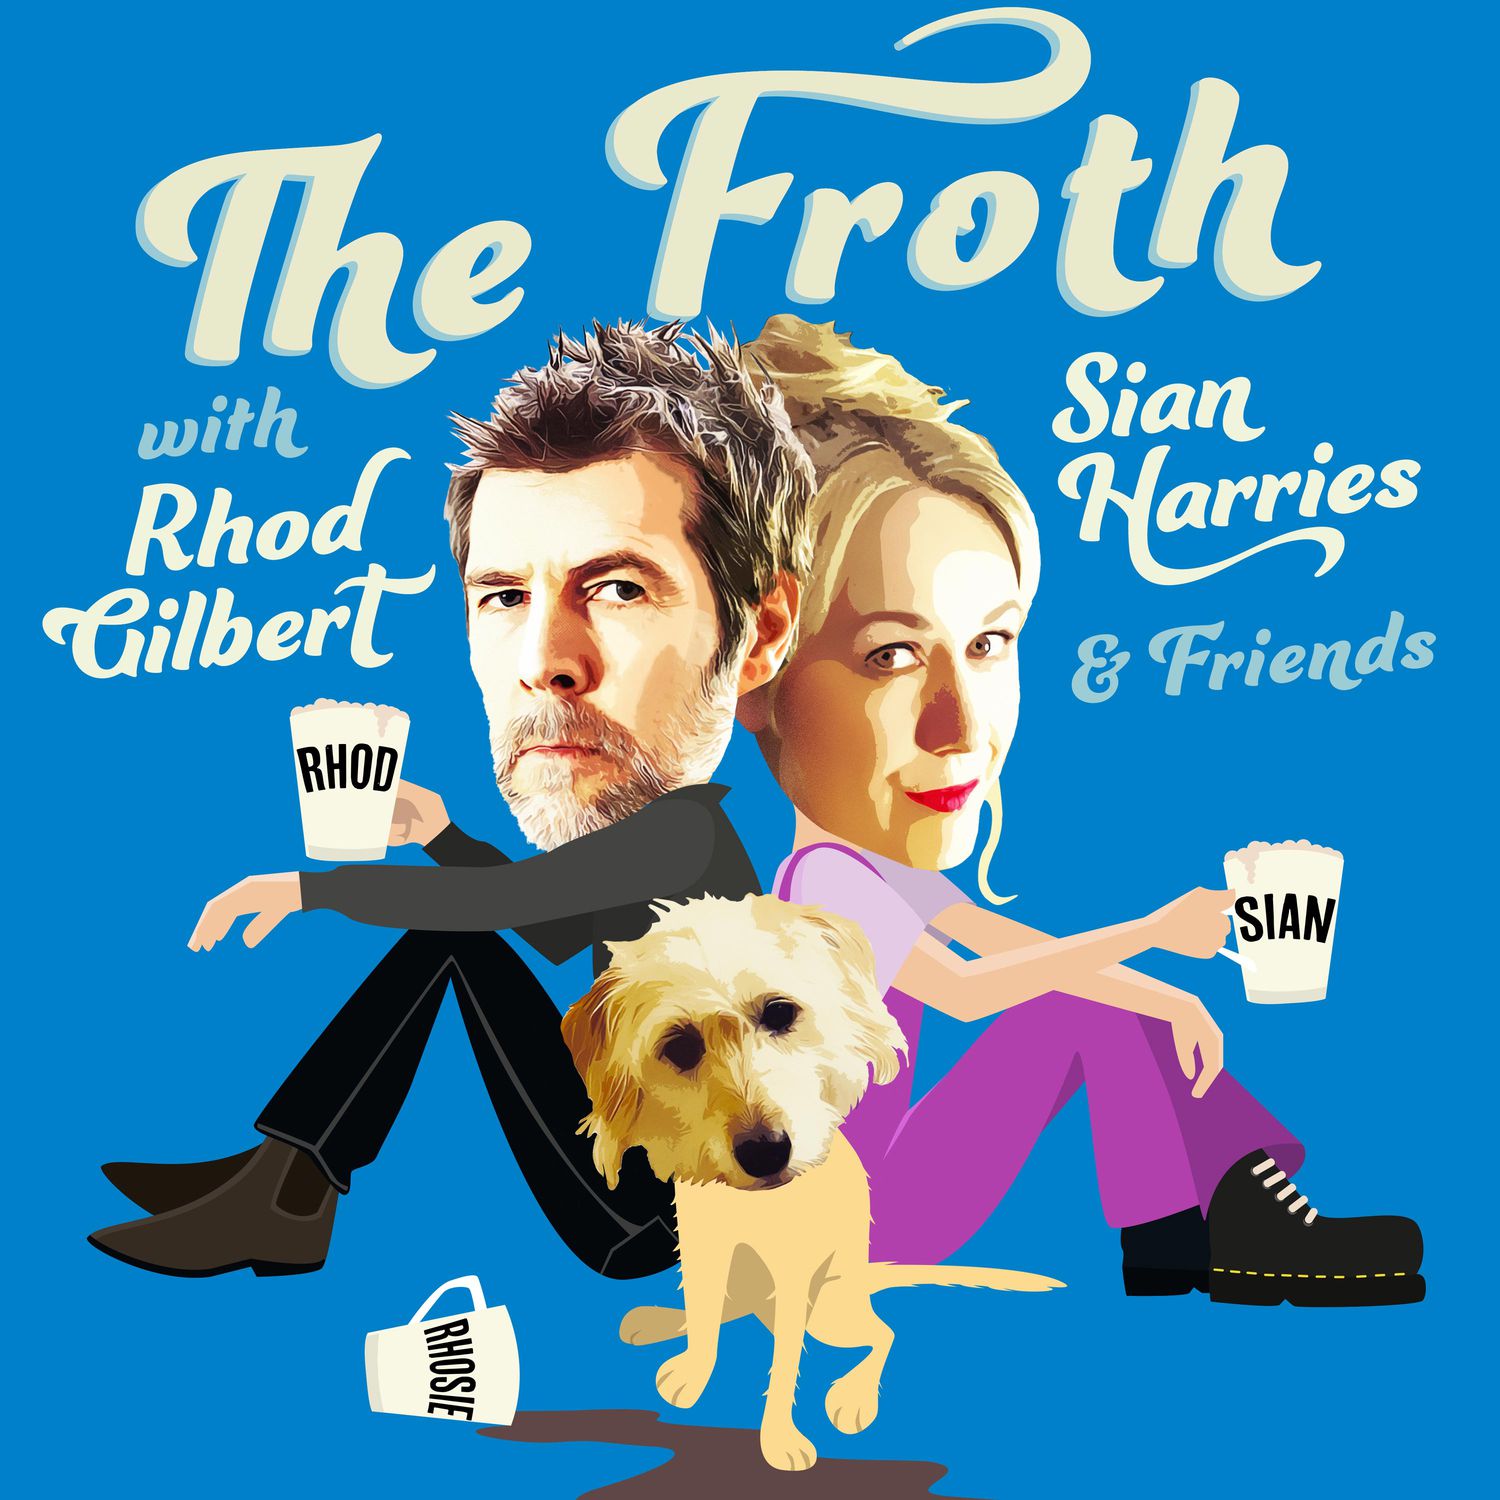 THE FROTH with RHOD GILBERT, SIAN HARRIES & Friends - Comedy Podcast podcast show image